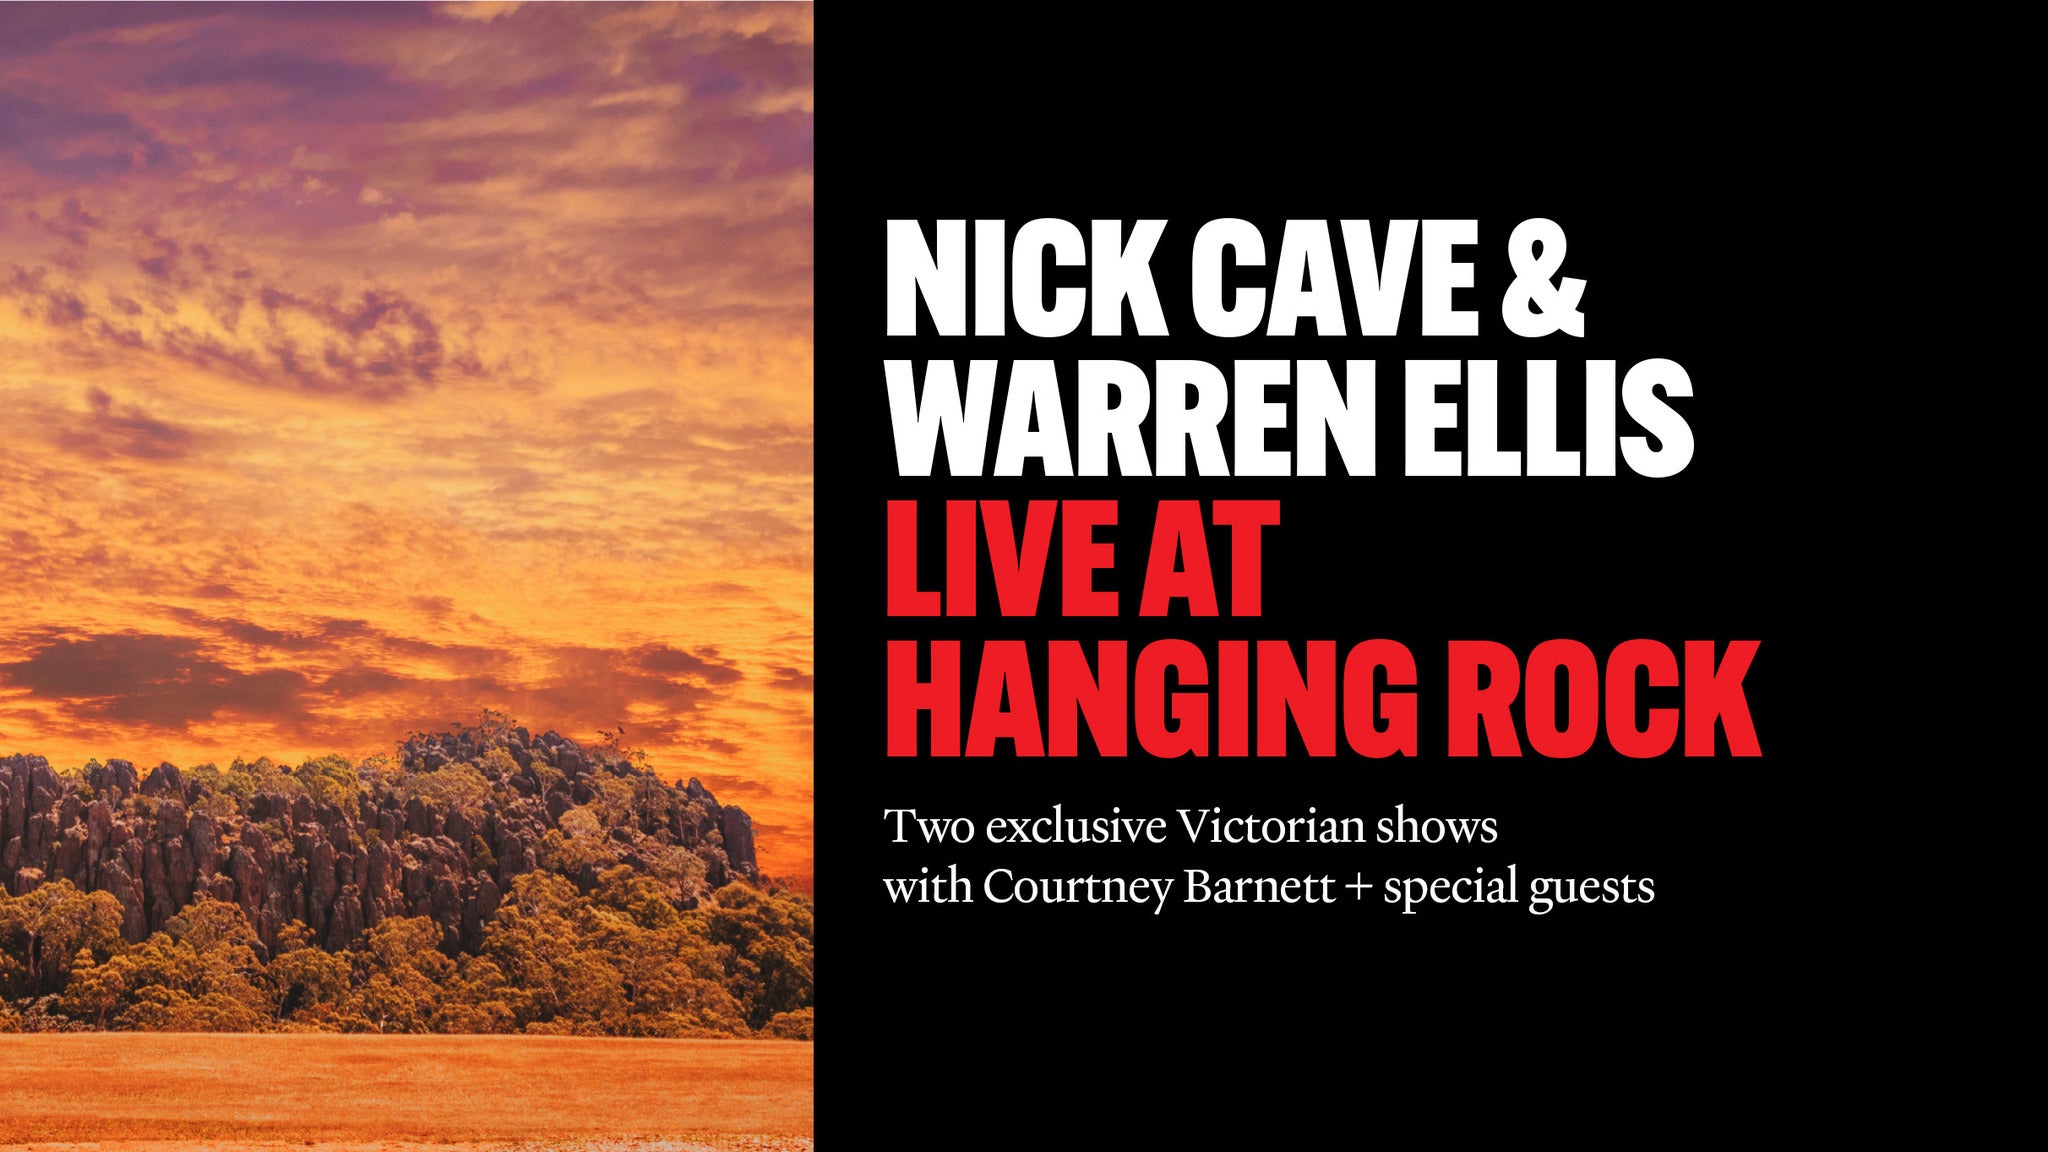 Image used with permission from Ticketmaster | Nick Cave + Warren Ellis tickets